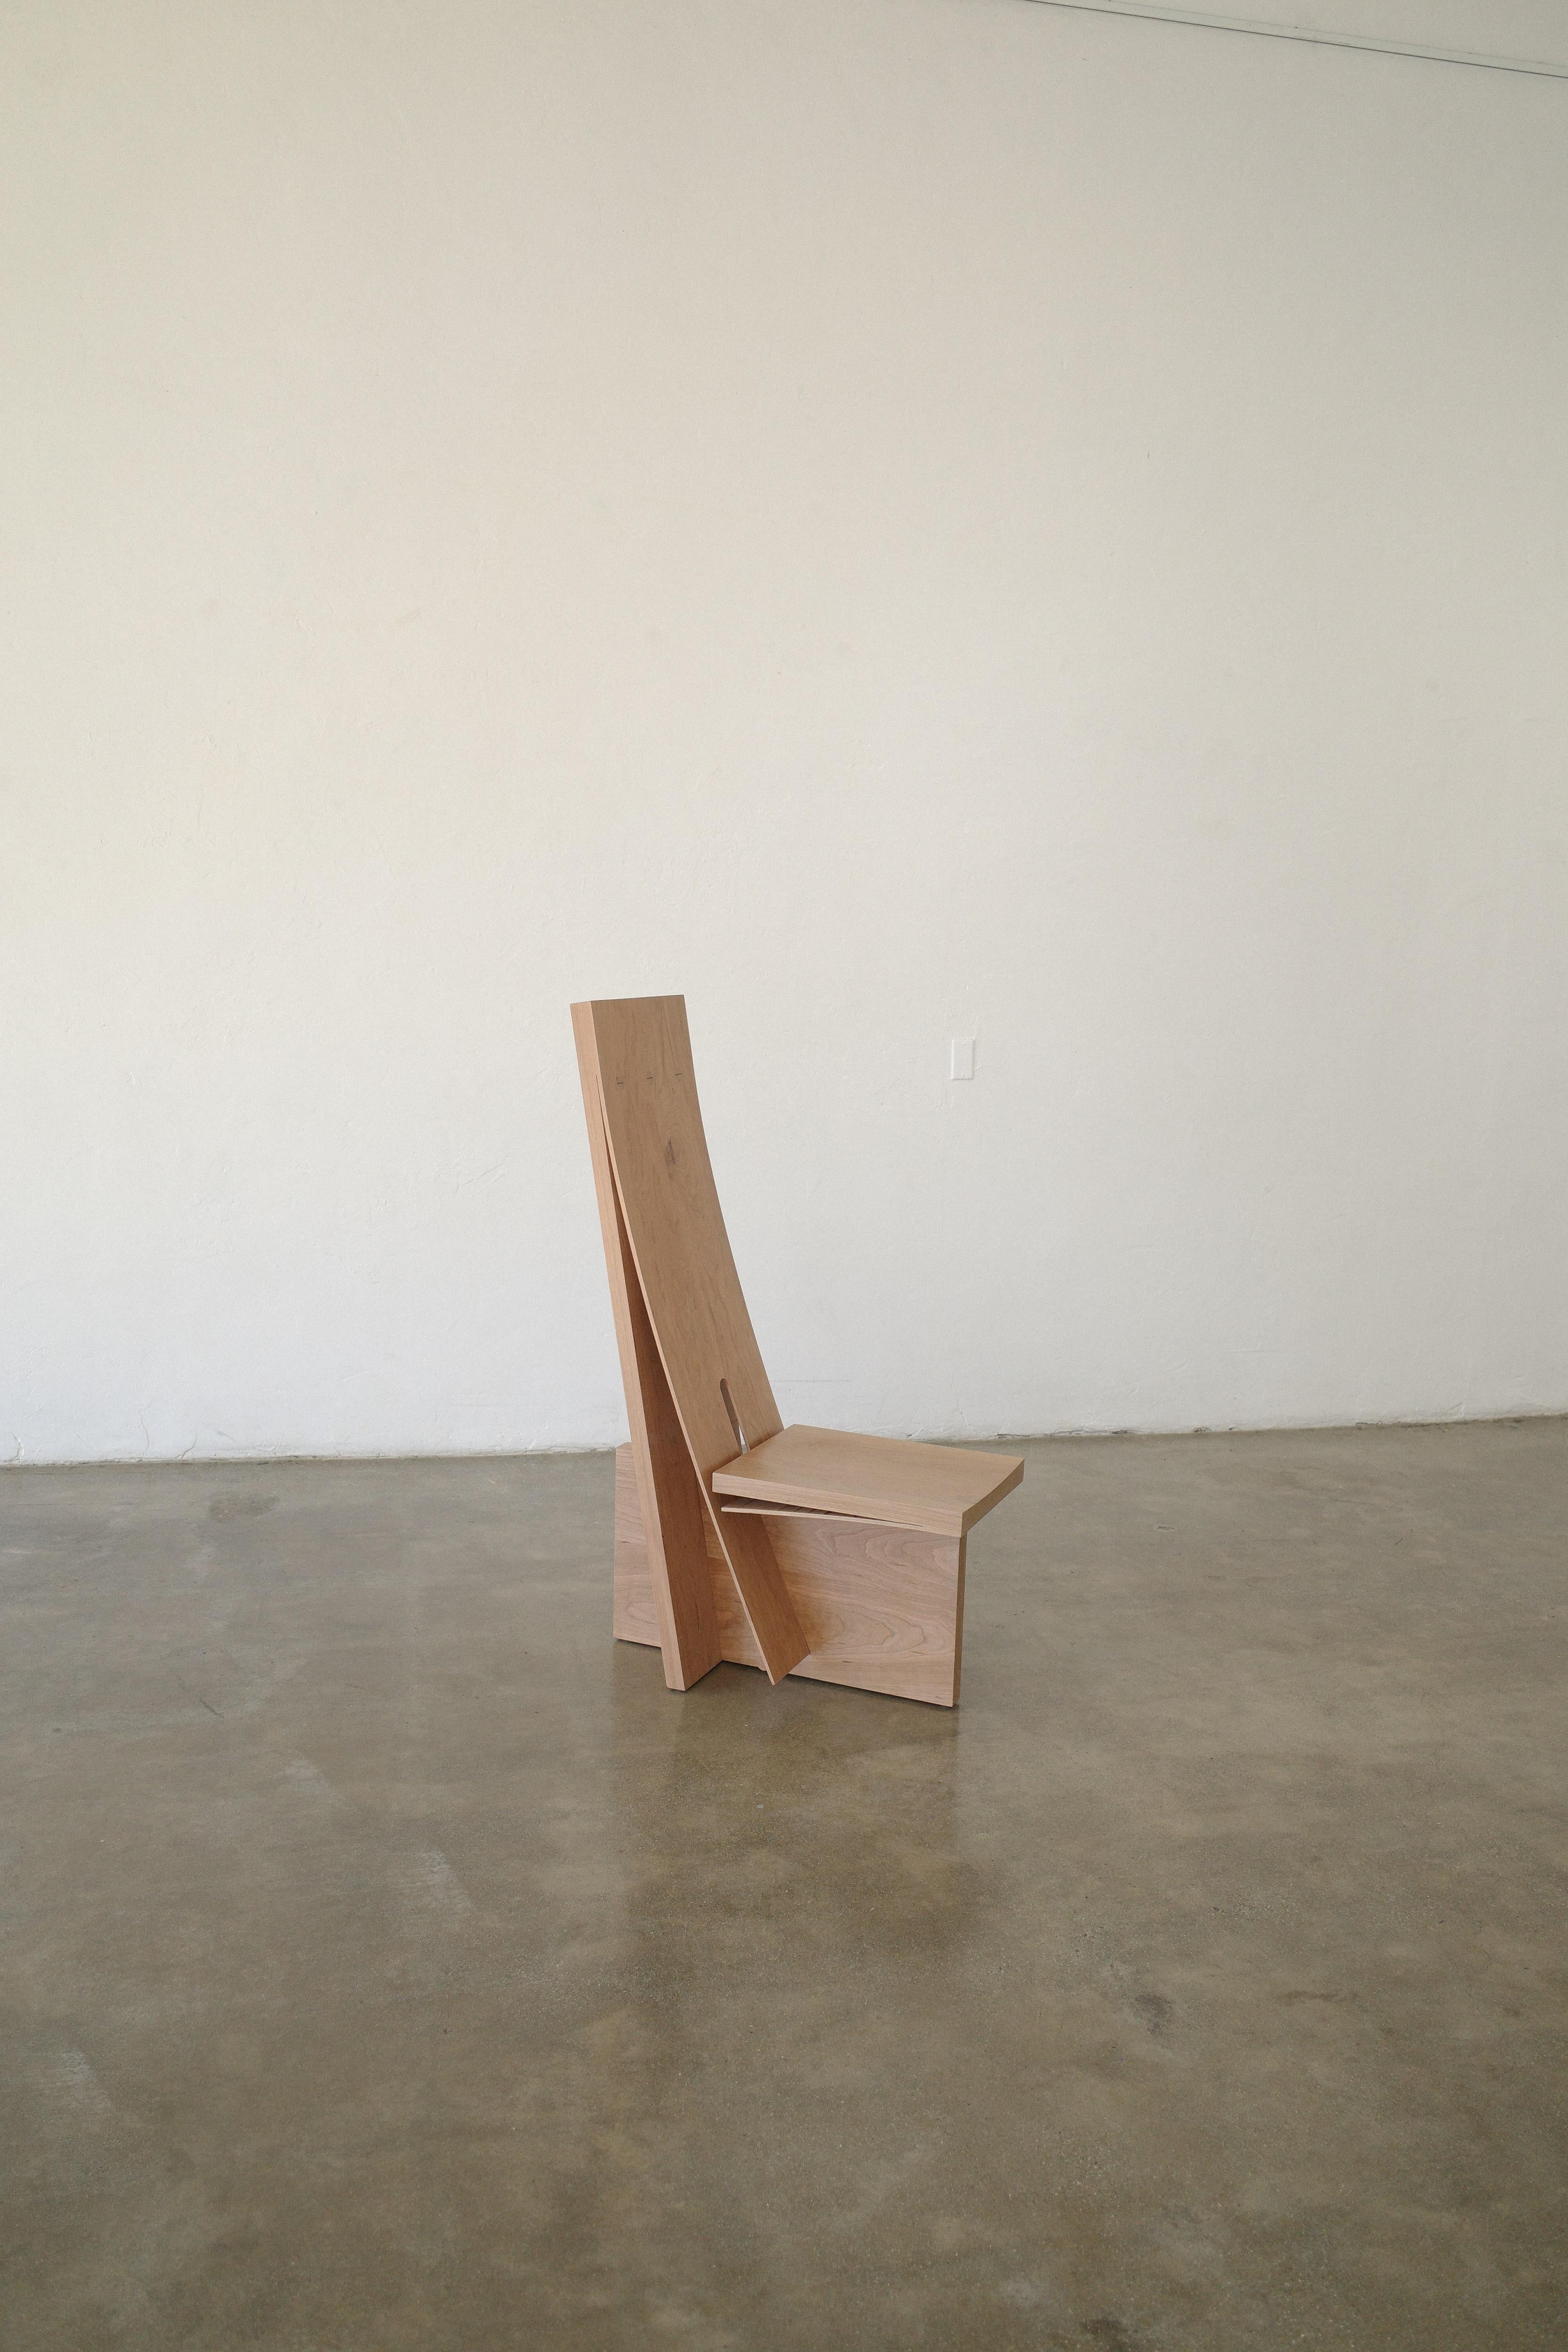 Cold bent chair by Nick Pourfard
Dimensions: D 61 x W 41 x H 102 cm.
Materials: wood.
Different finishes available.

Wood is bent without steam or lamination, playing advantage to tension and memory built into the wood naturally.

Nicholas